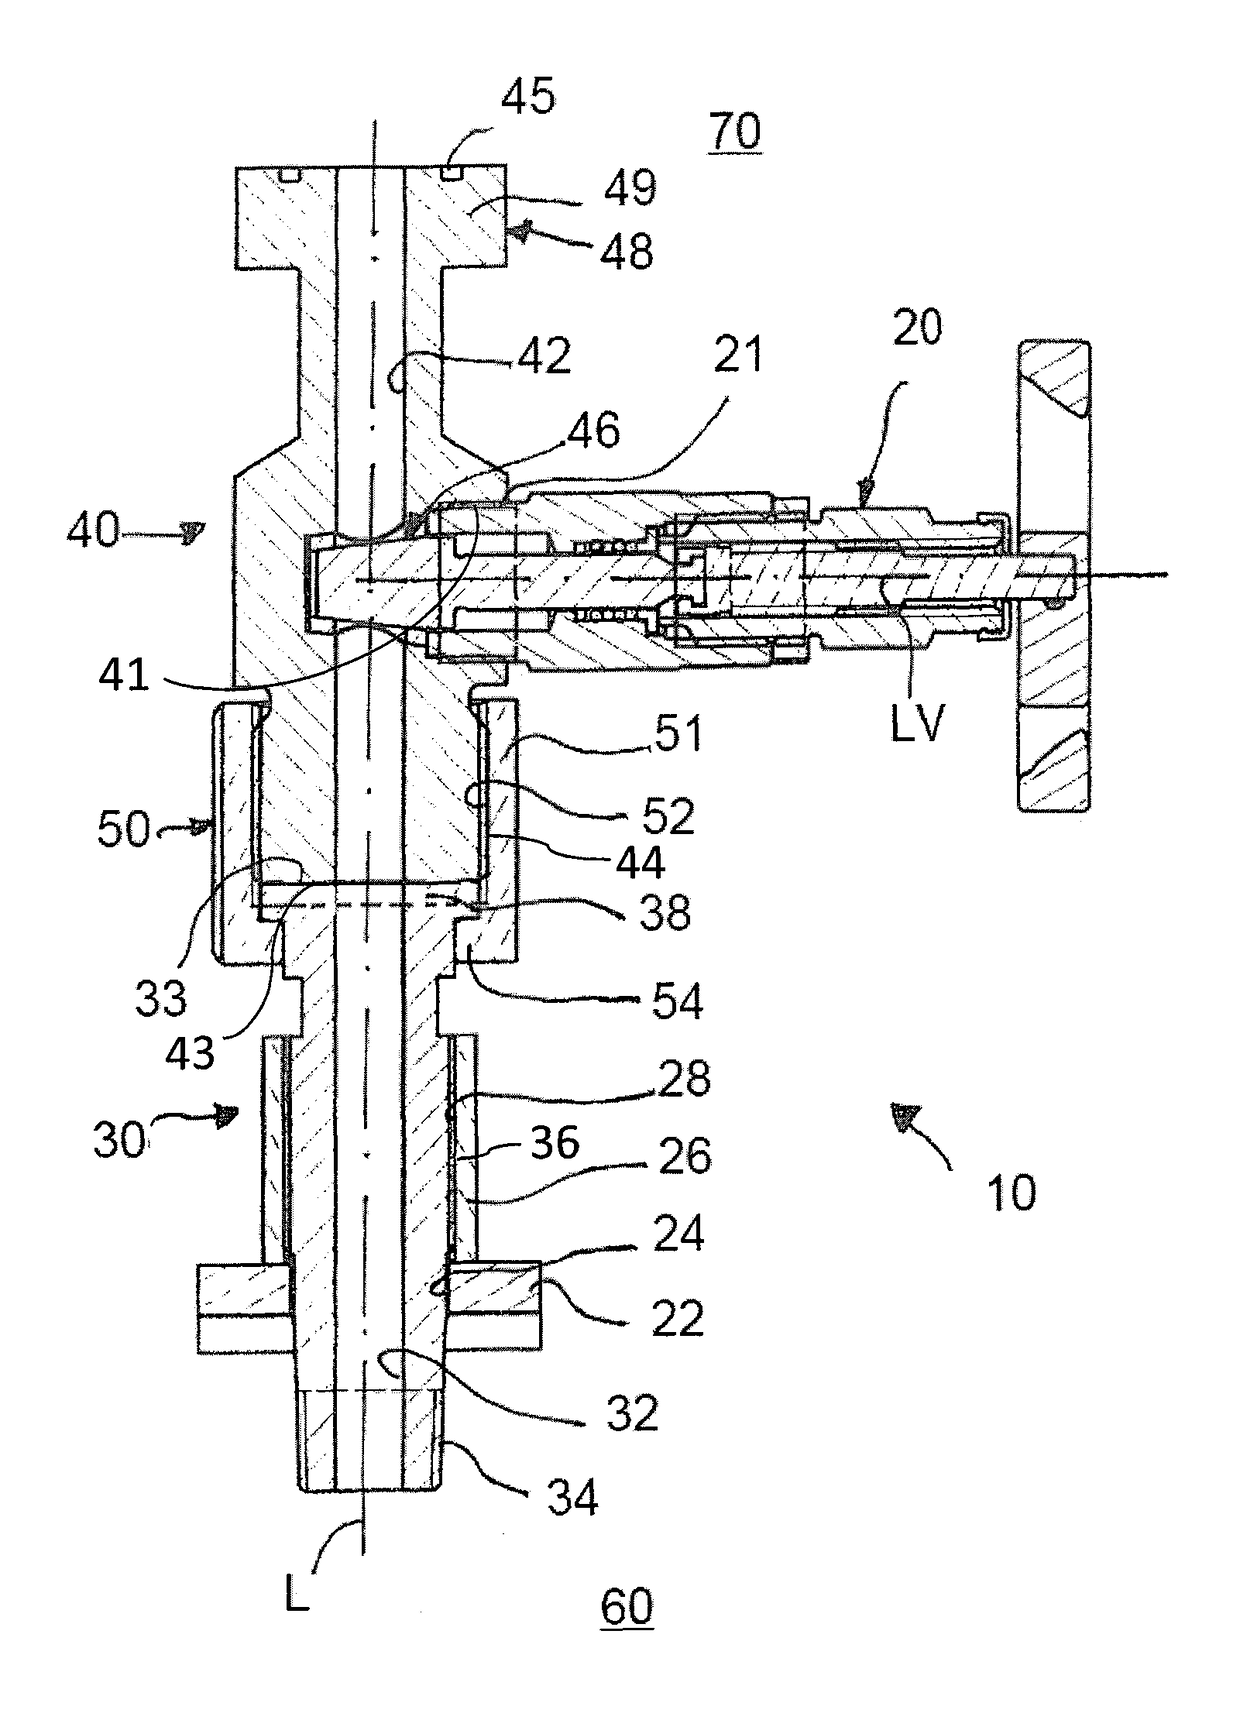 Connecting apparatus for creating a connection between a measuring instrument/valve block and a pipeline